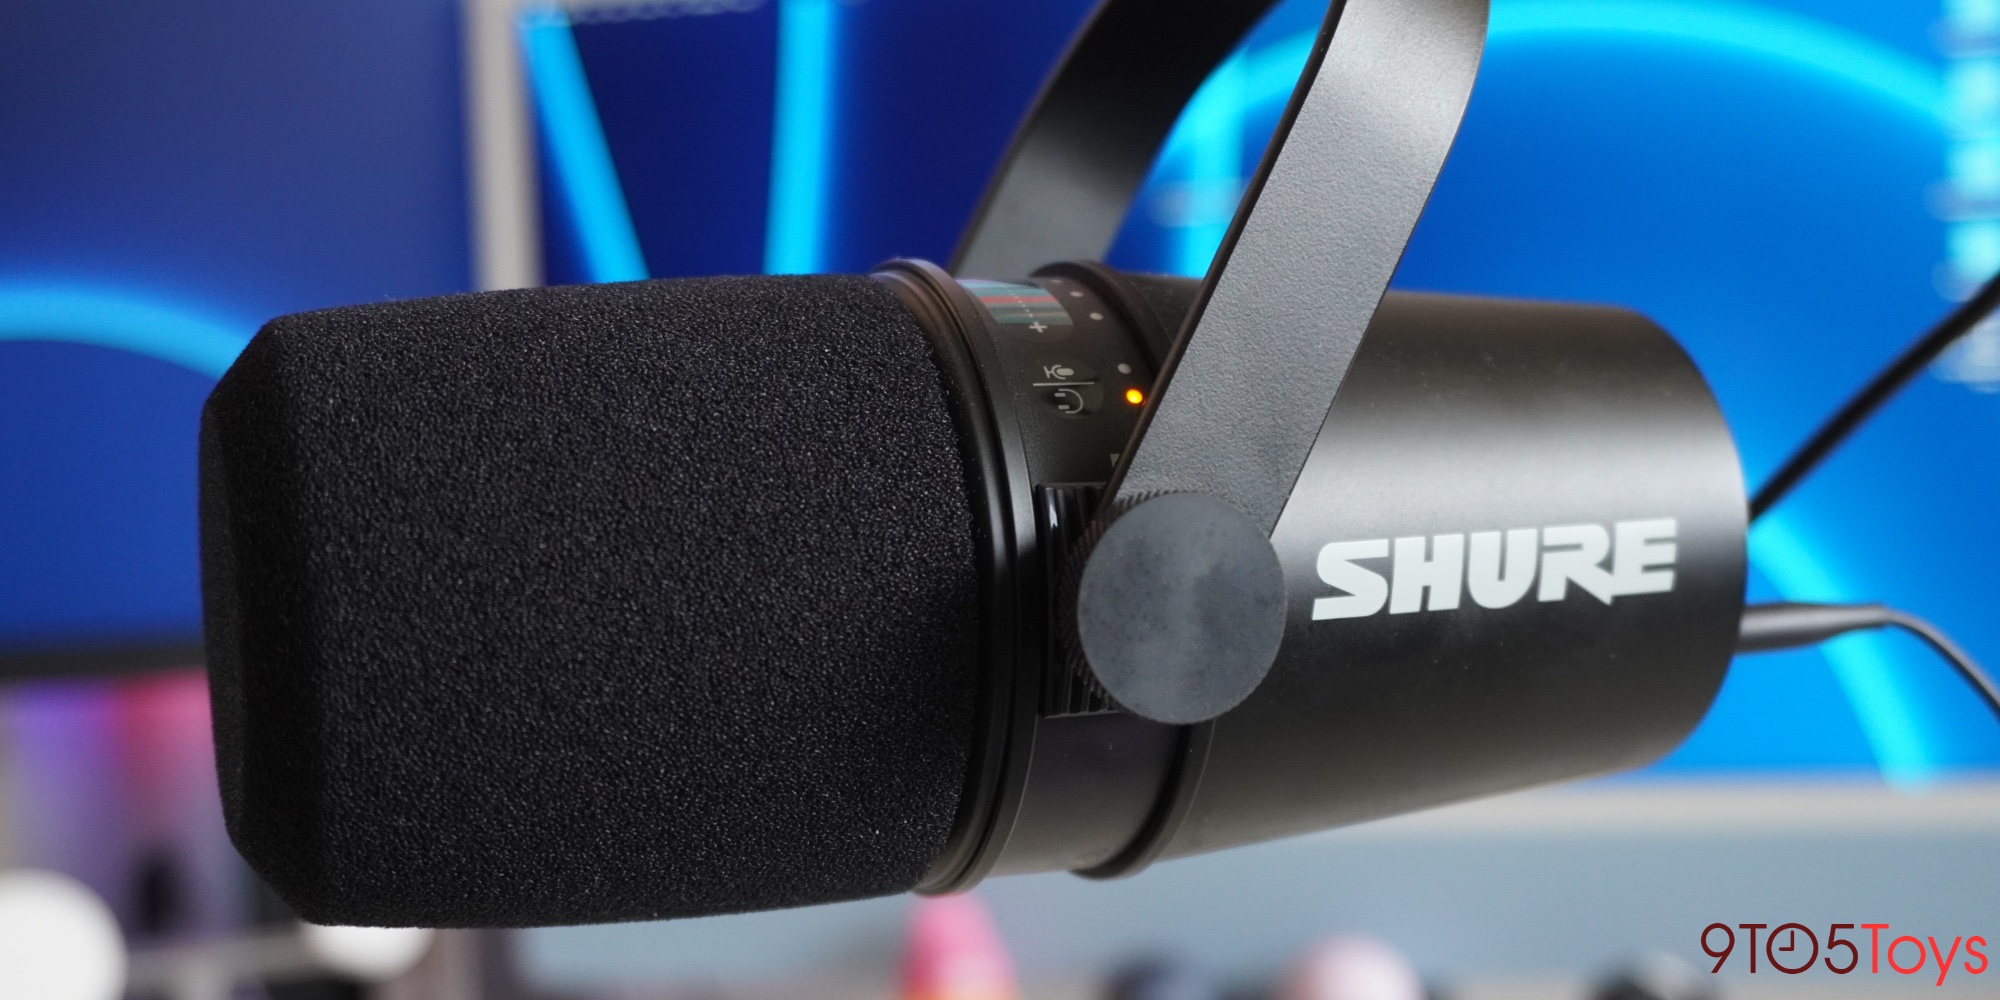 https://9to5toys.com/wp-content/uploads/sites/5/2022/06/Shure-MV7-USB-Podcast-Microphone.jpg